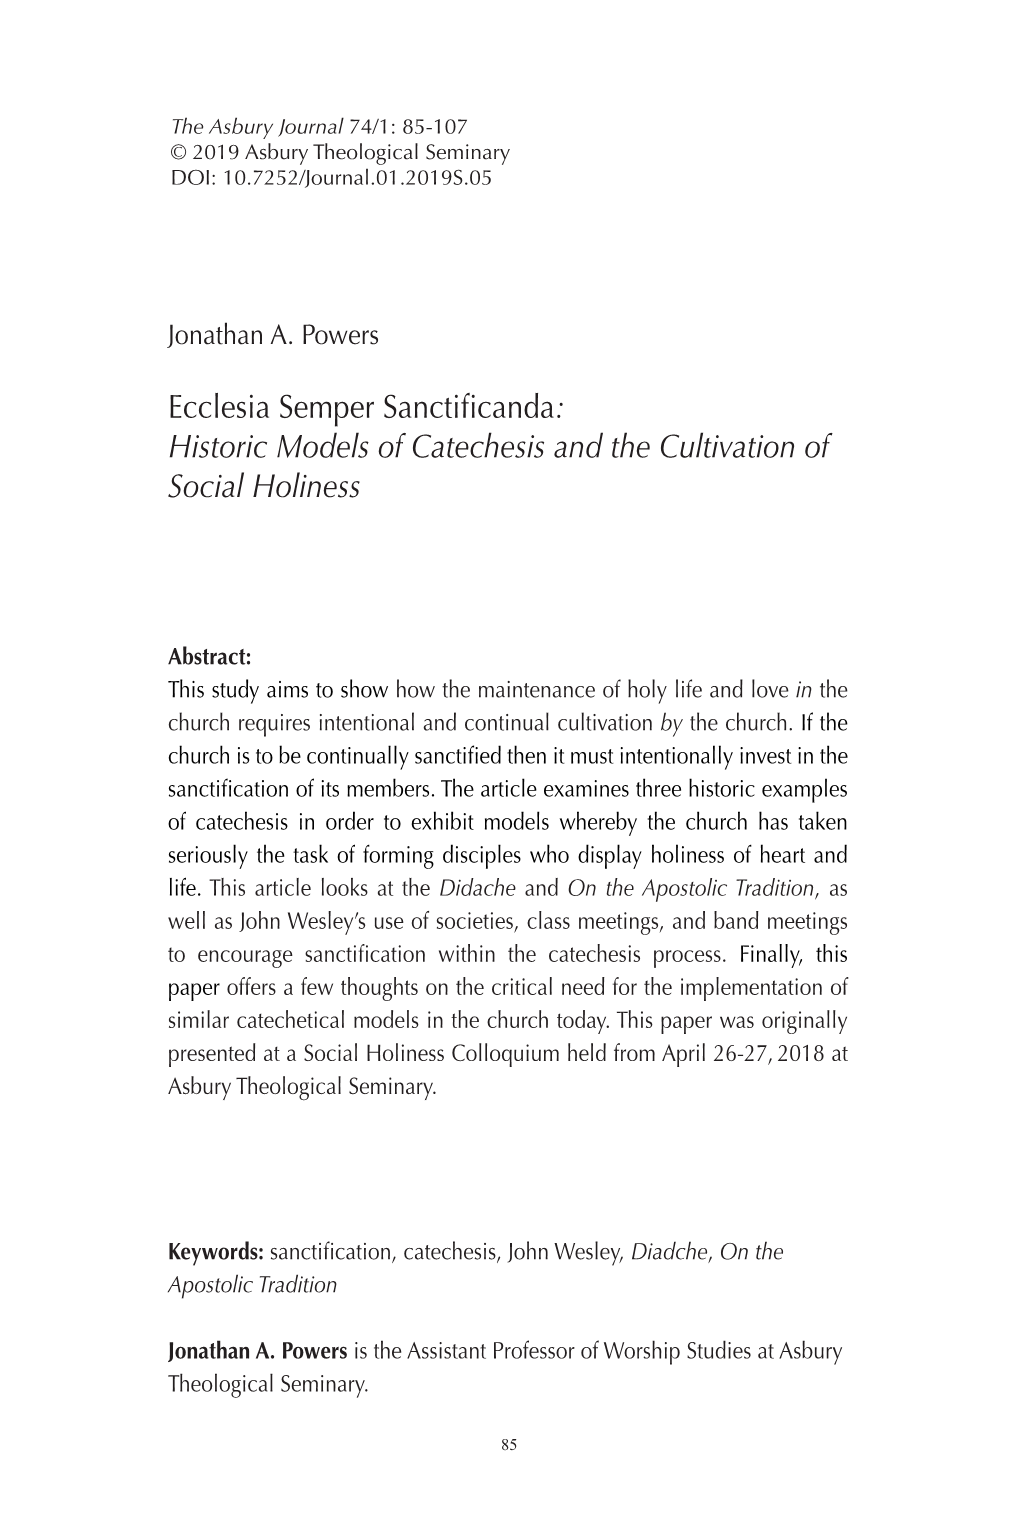 Historic Models of Catechesis and the Cultivation of Social Holiness